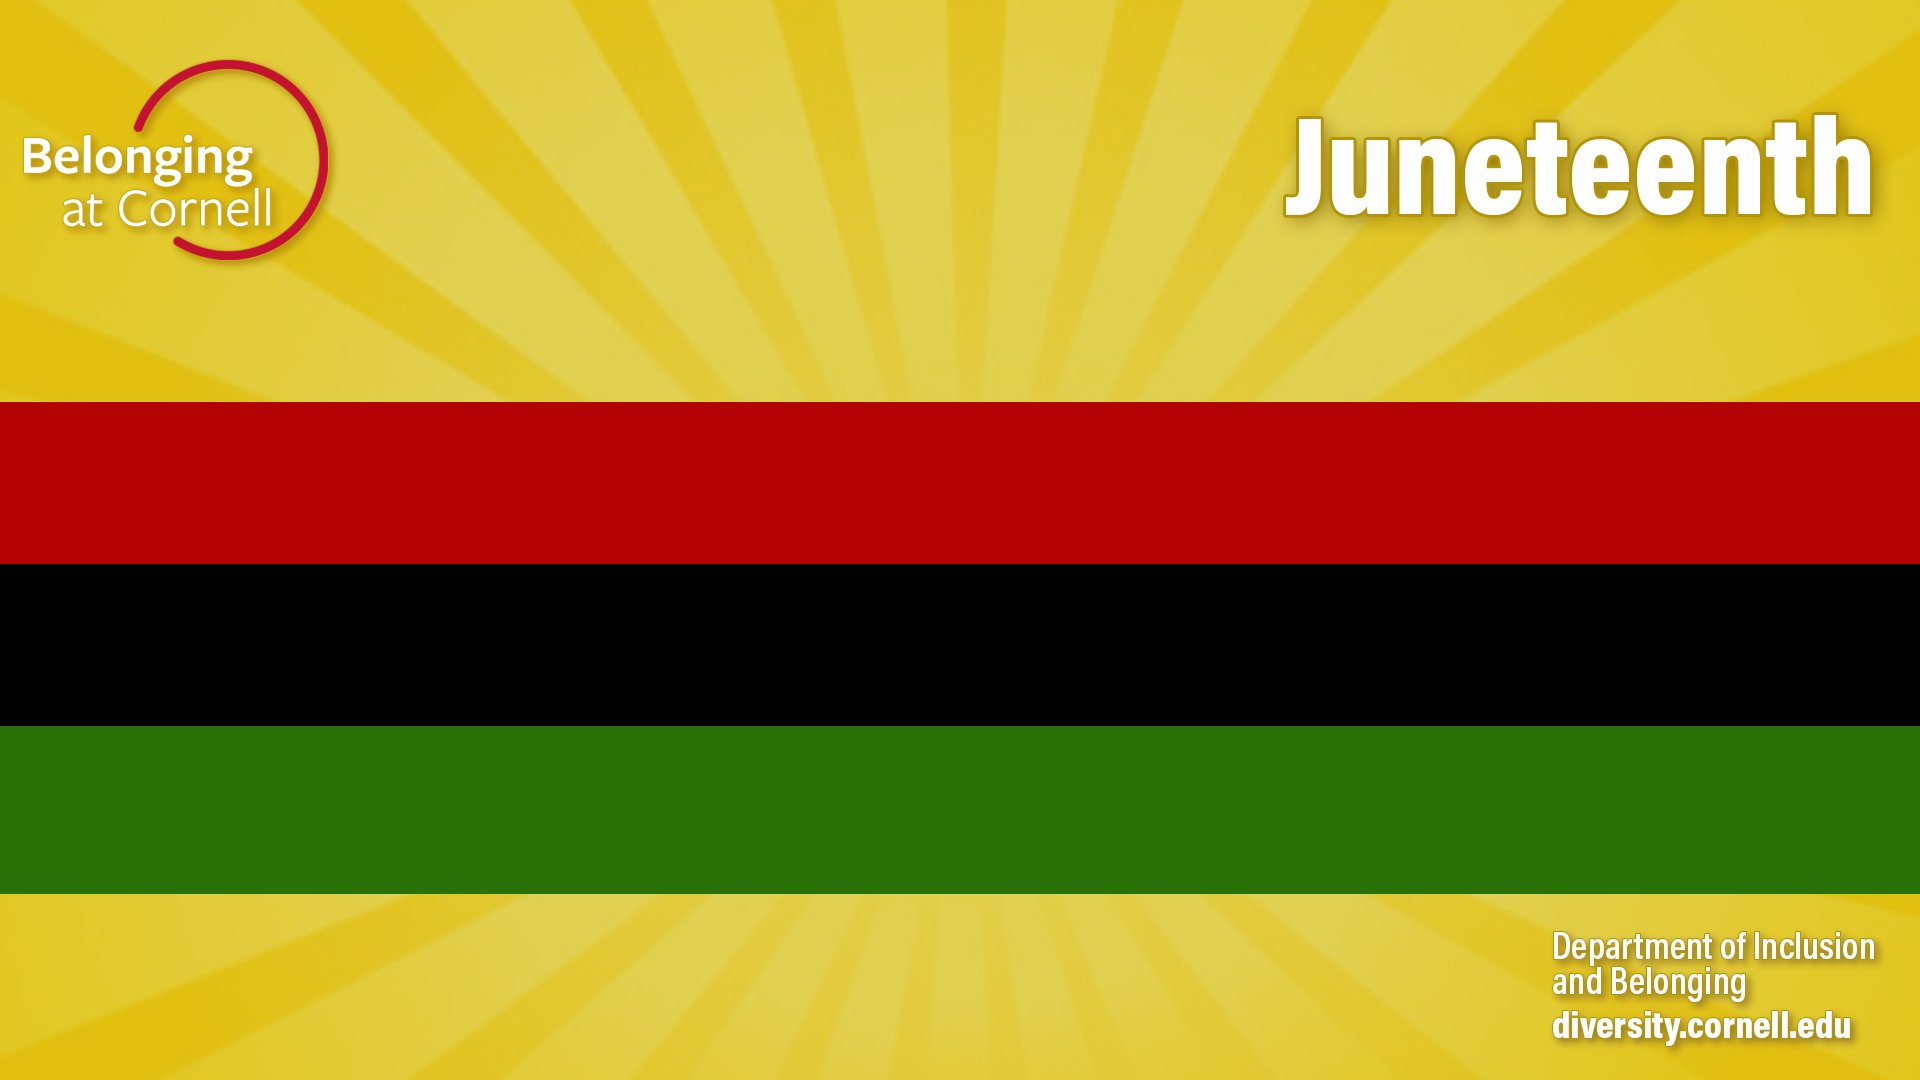 Zoom background with red, black, and green African diaspora colors in honor of Juneteenth